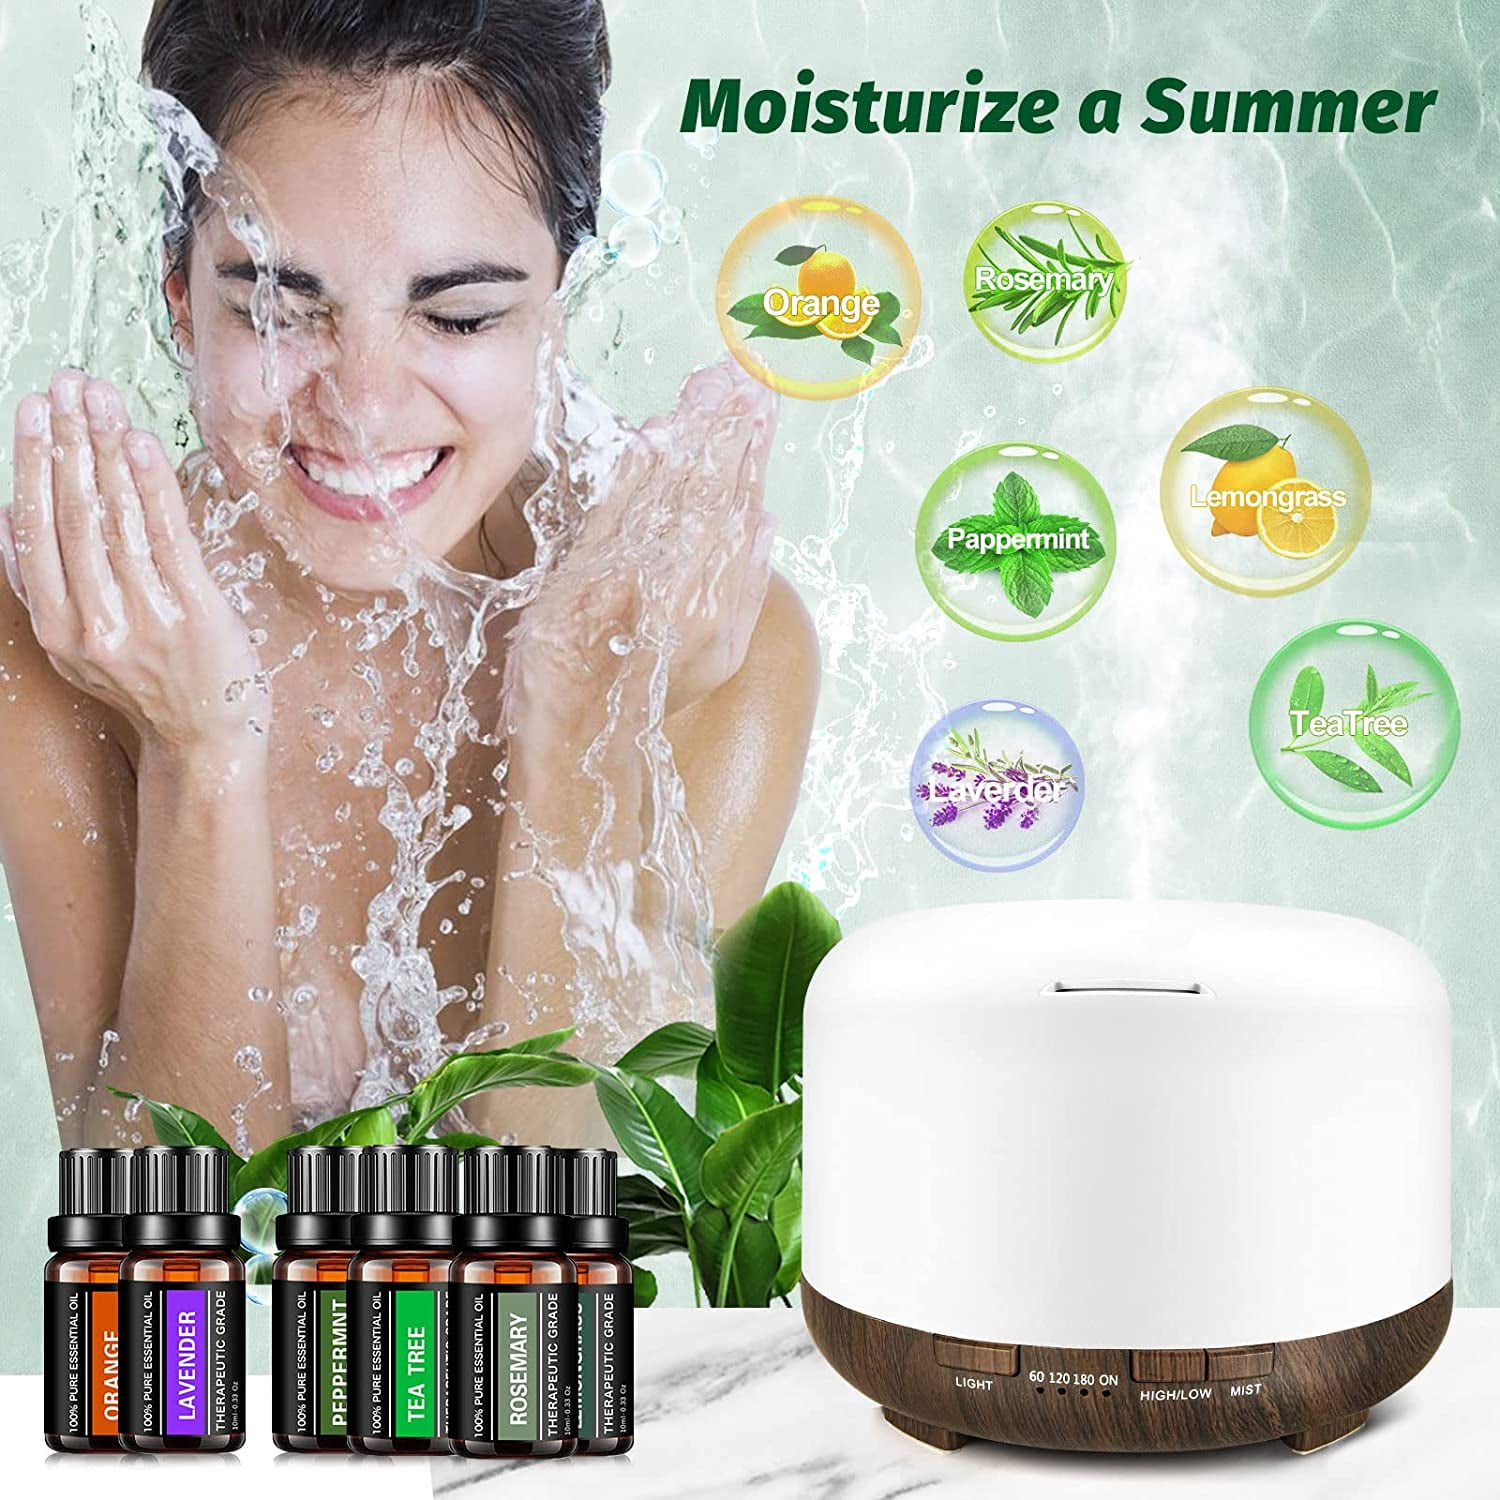 Extreme Fit 6-Pack: Aromatherapy Pure Essential Oils for Diffuser, Humidifier, Massage, Skin & Hair Care Well-Being, Dubai